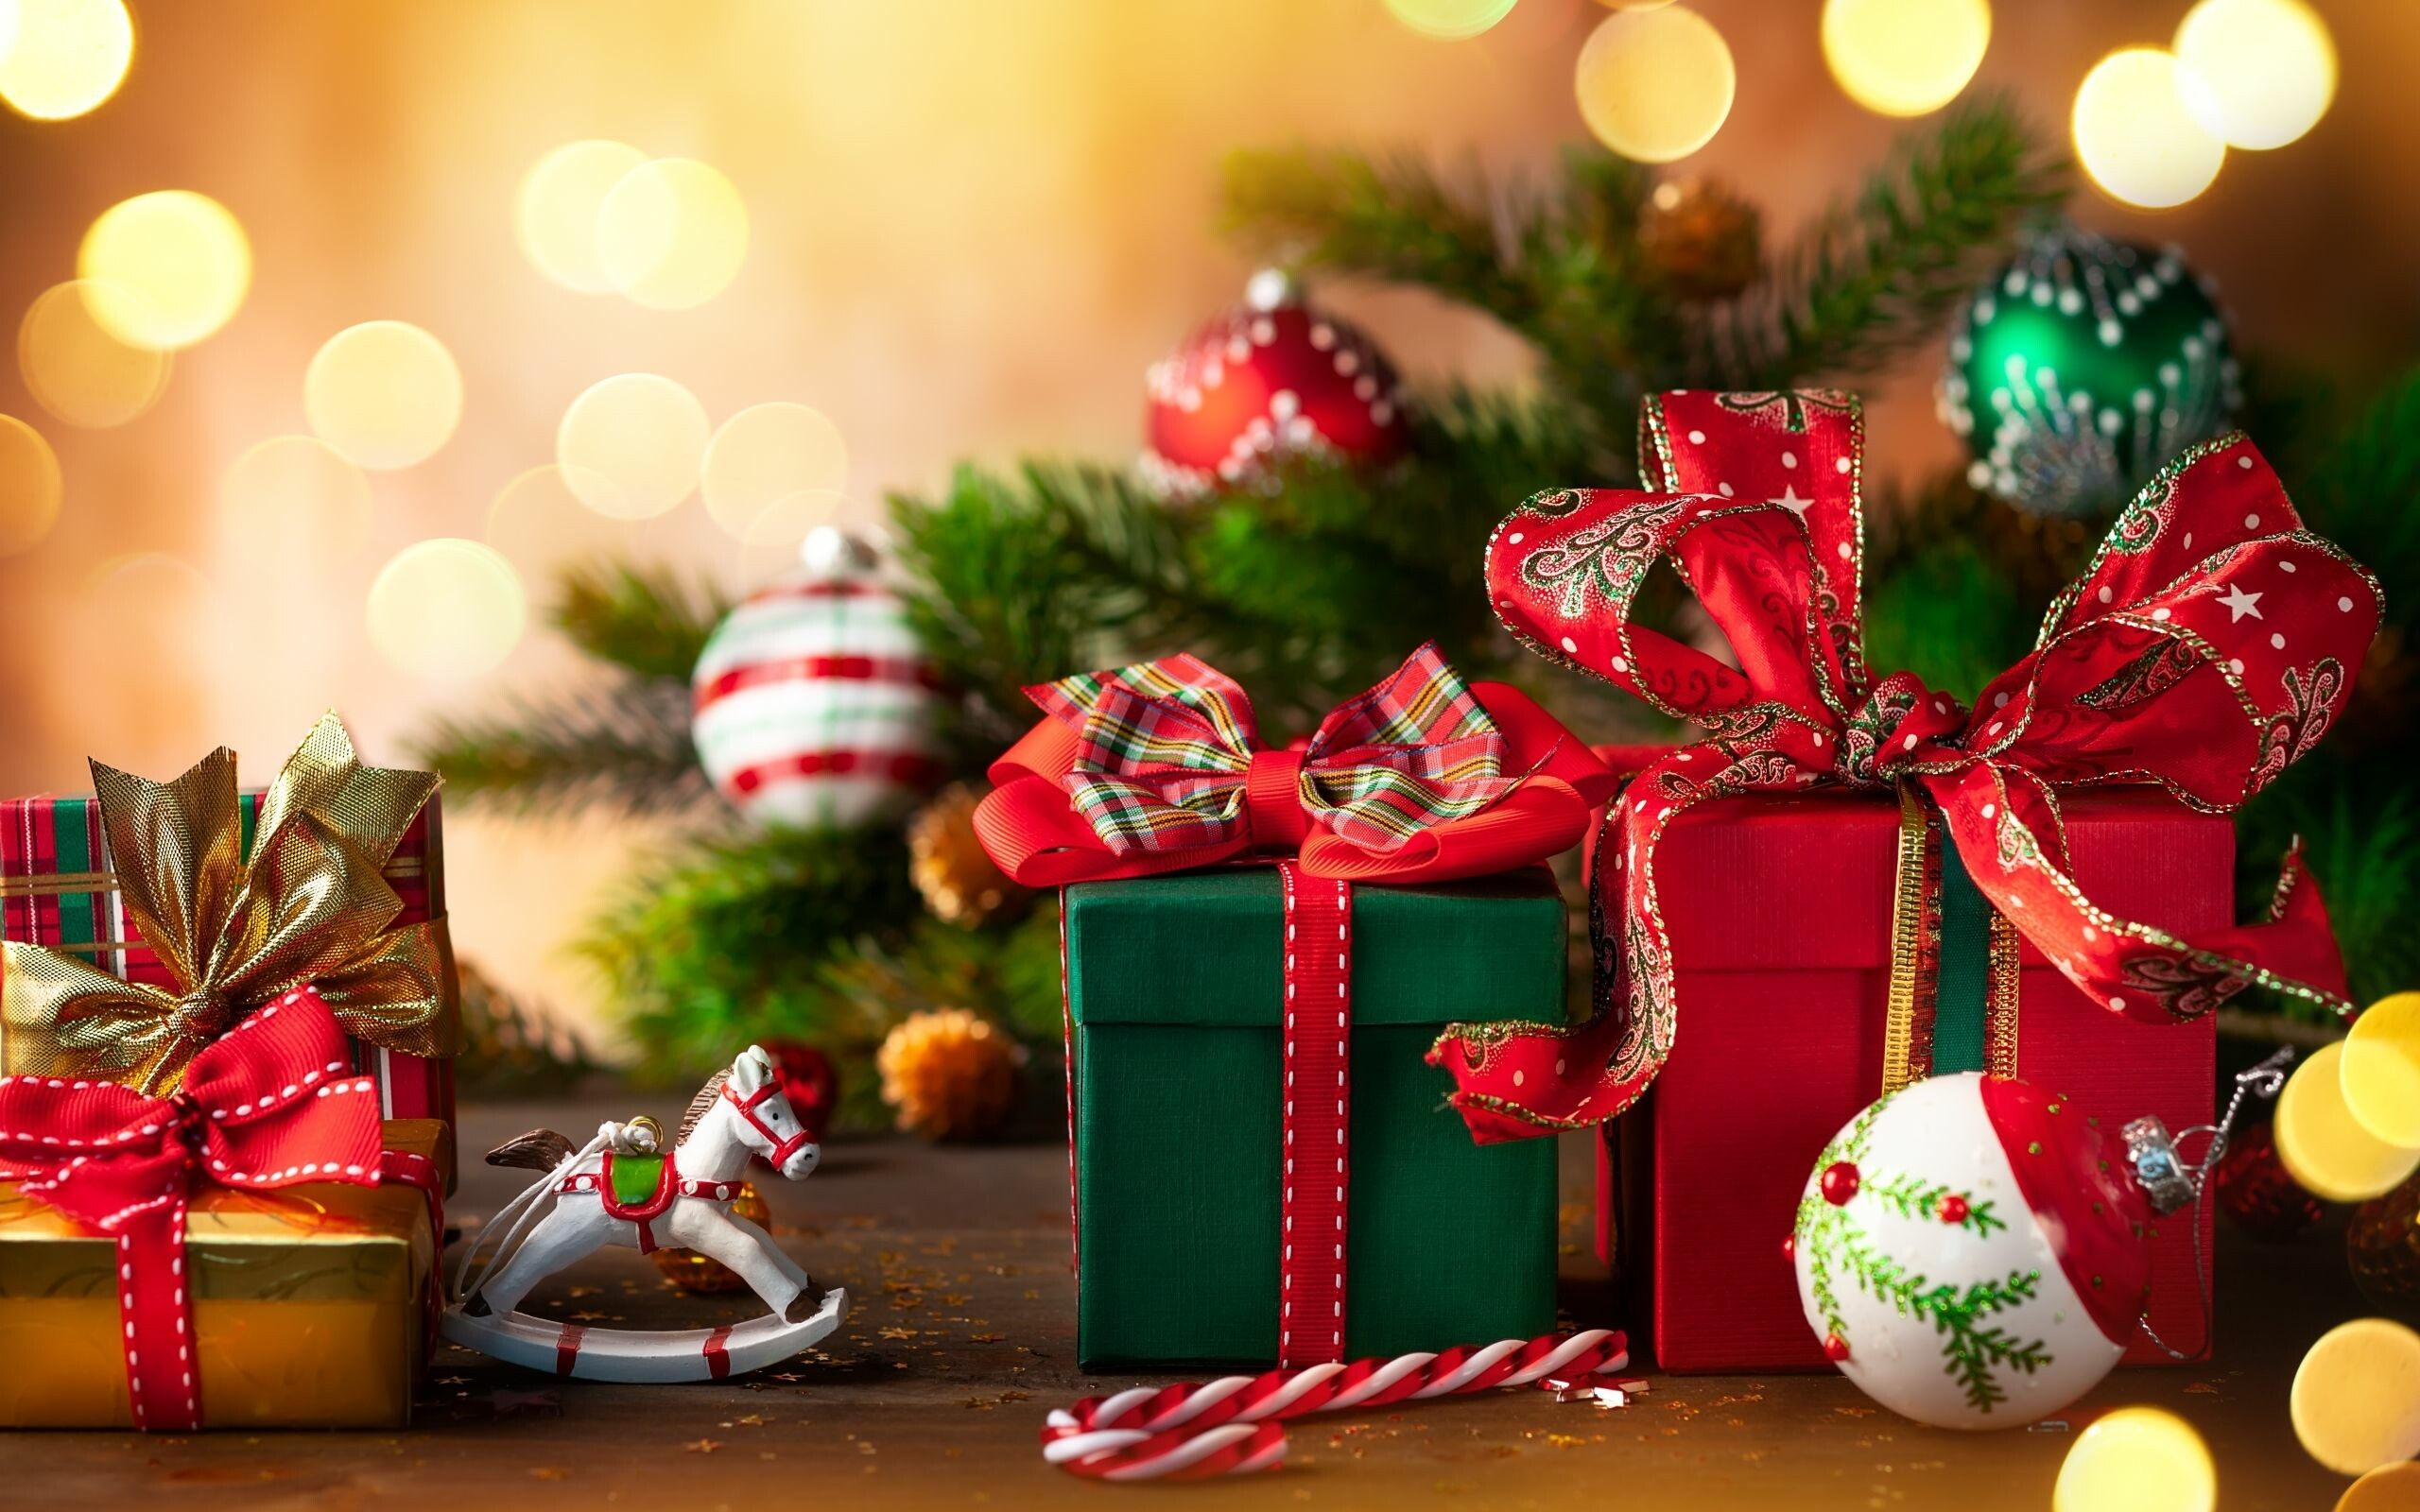 Christmas Gifts: Christmas Eve is the most common date for present-giving in the Western culture. 2560x1600 HD Wallpaper.